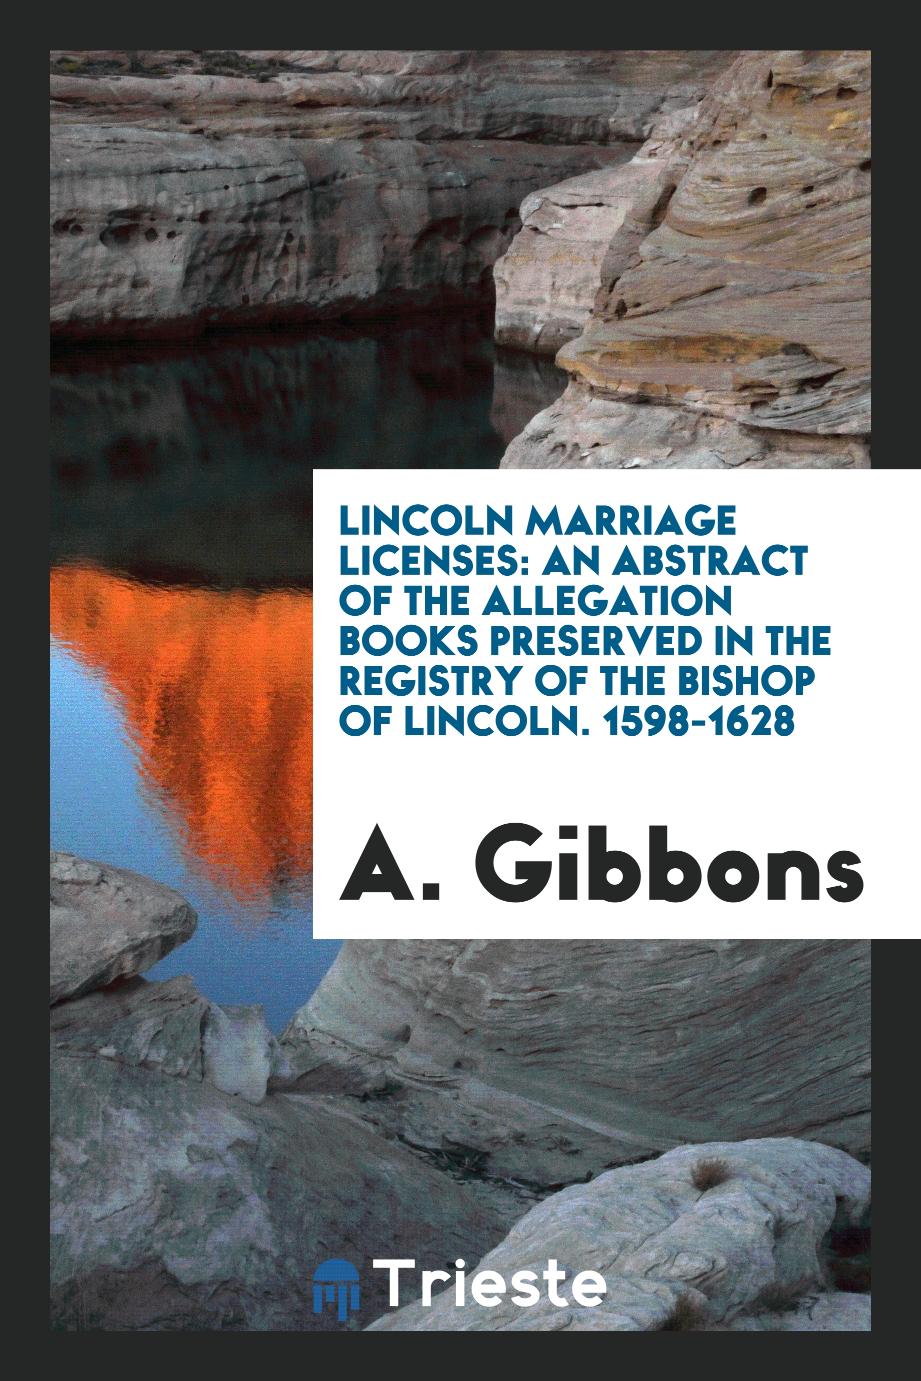 Lincoln Marriage Licenses: An Abstract of the Allegation Books Preserved in the Registry of the Bishop of Lincoln. 1598-1628